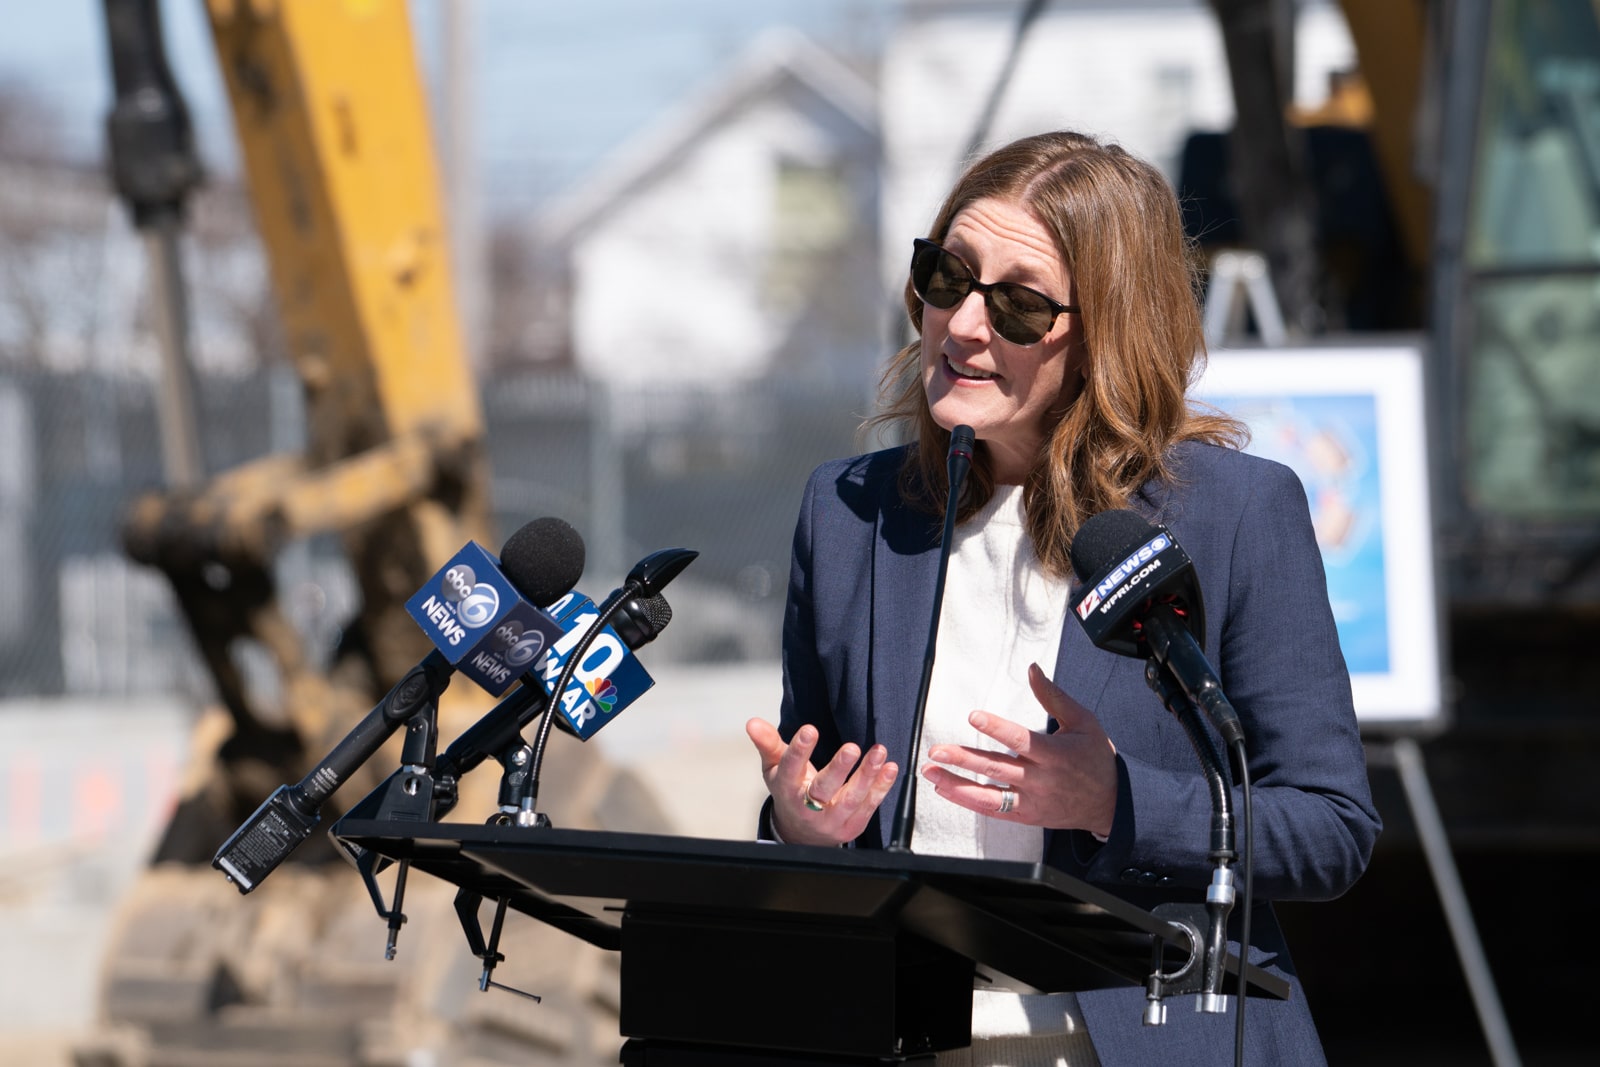 Jennifer Hawkins, Executive Director of ONE Neighborhood Builders, speaks at the groundbreaking event for the Residences at Riverside Square in East Providence on Monday, April 10, 2023. Photo by Stephen Ide/ONE Neighborhood Builders